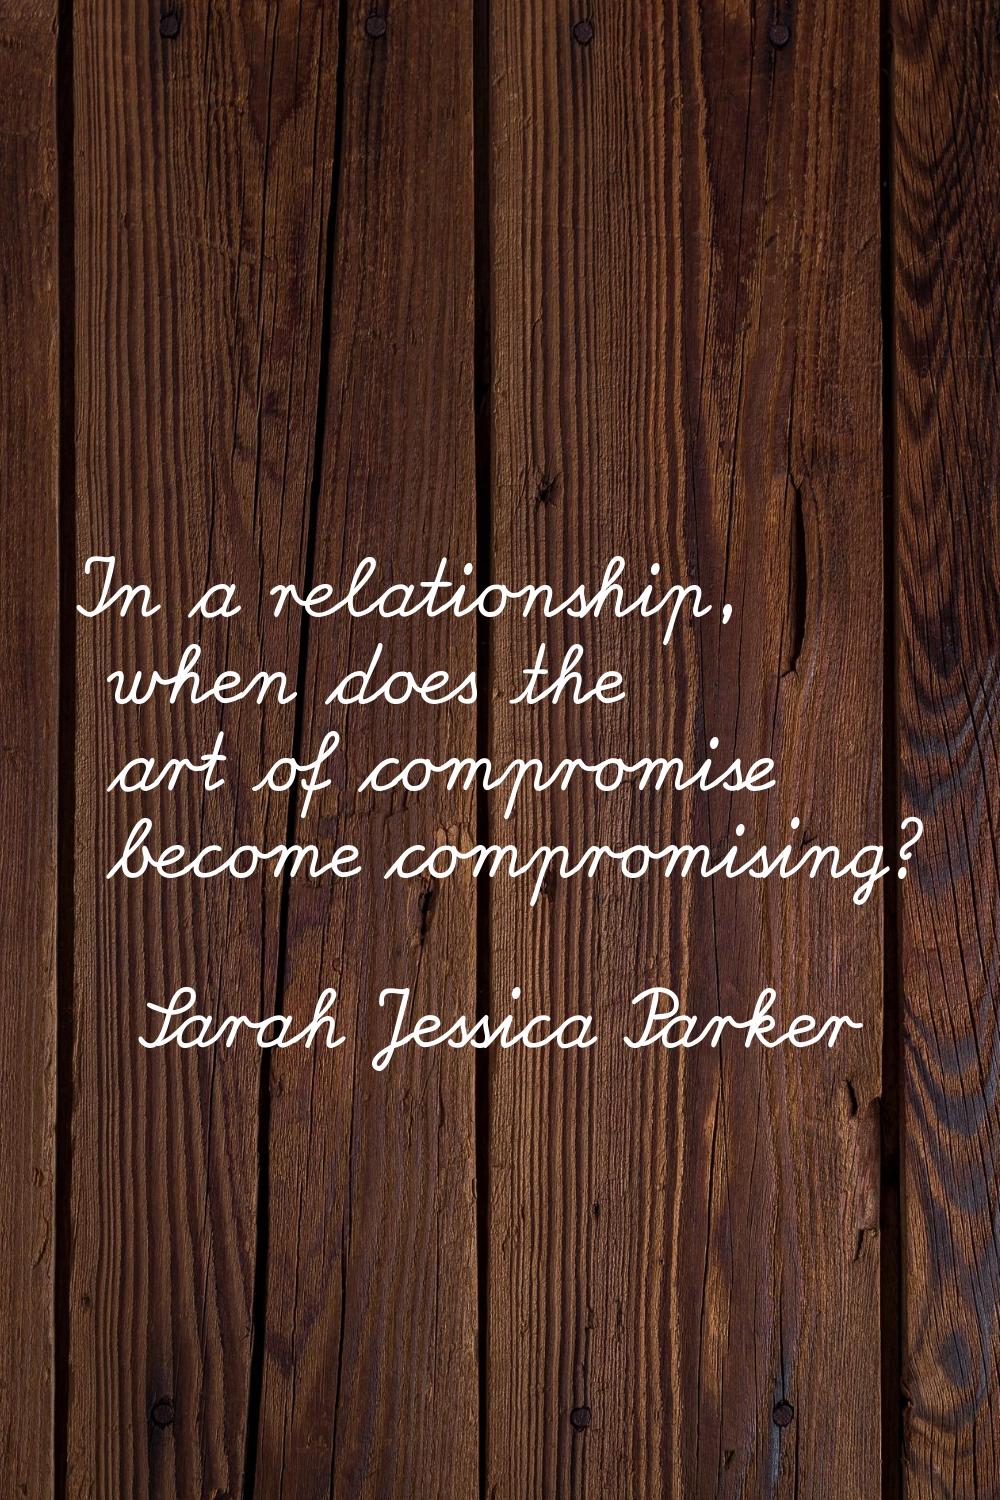 In a relationship, when does the art of compromise become compromising?